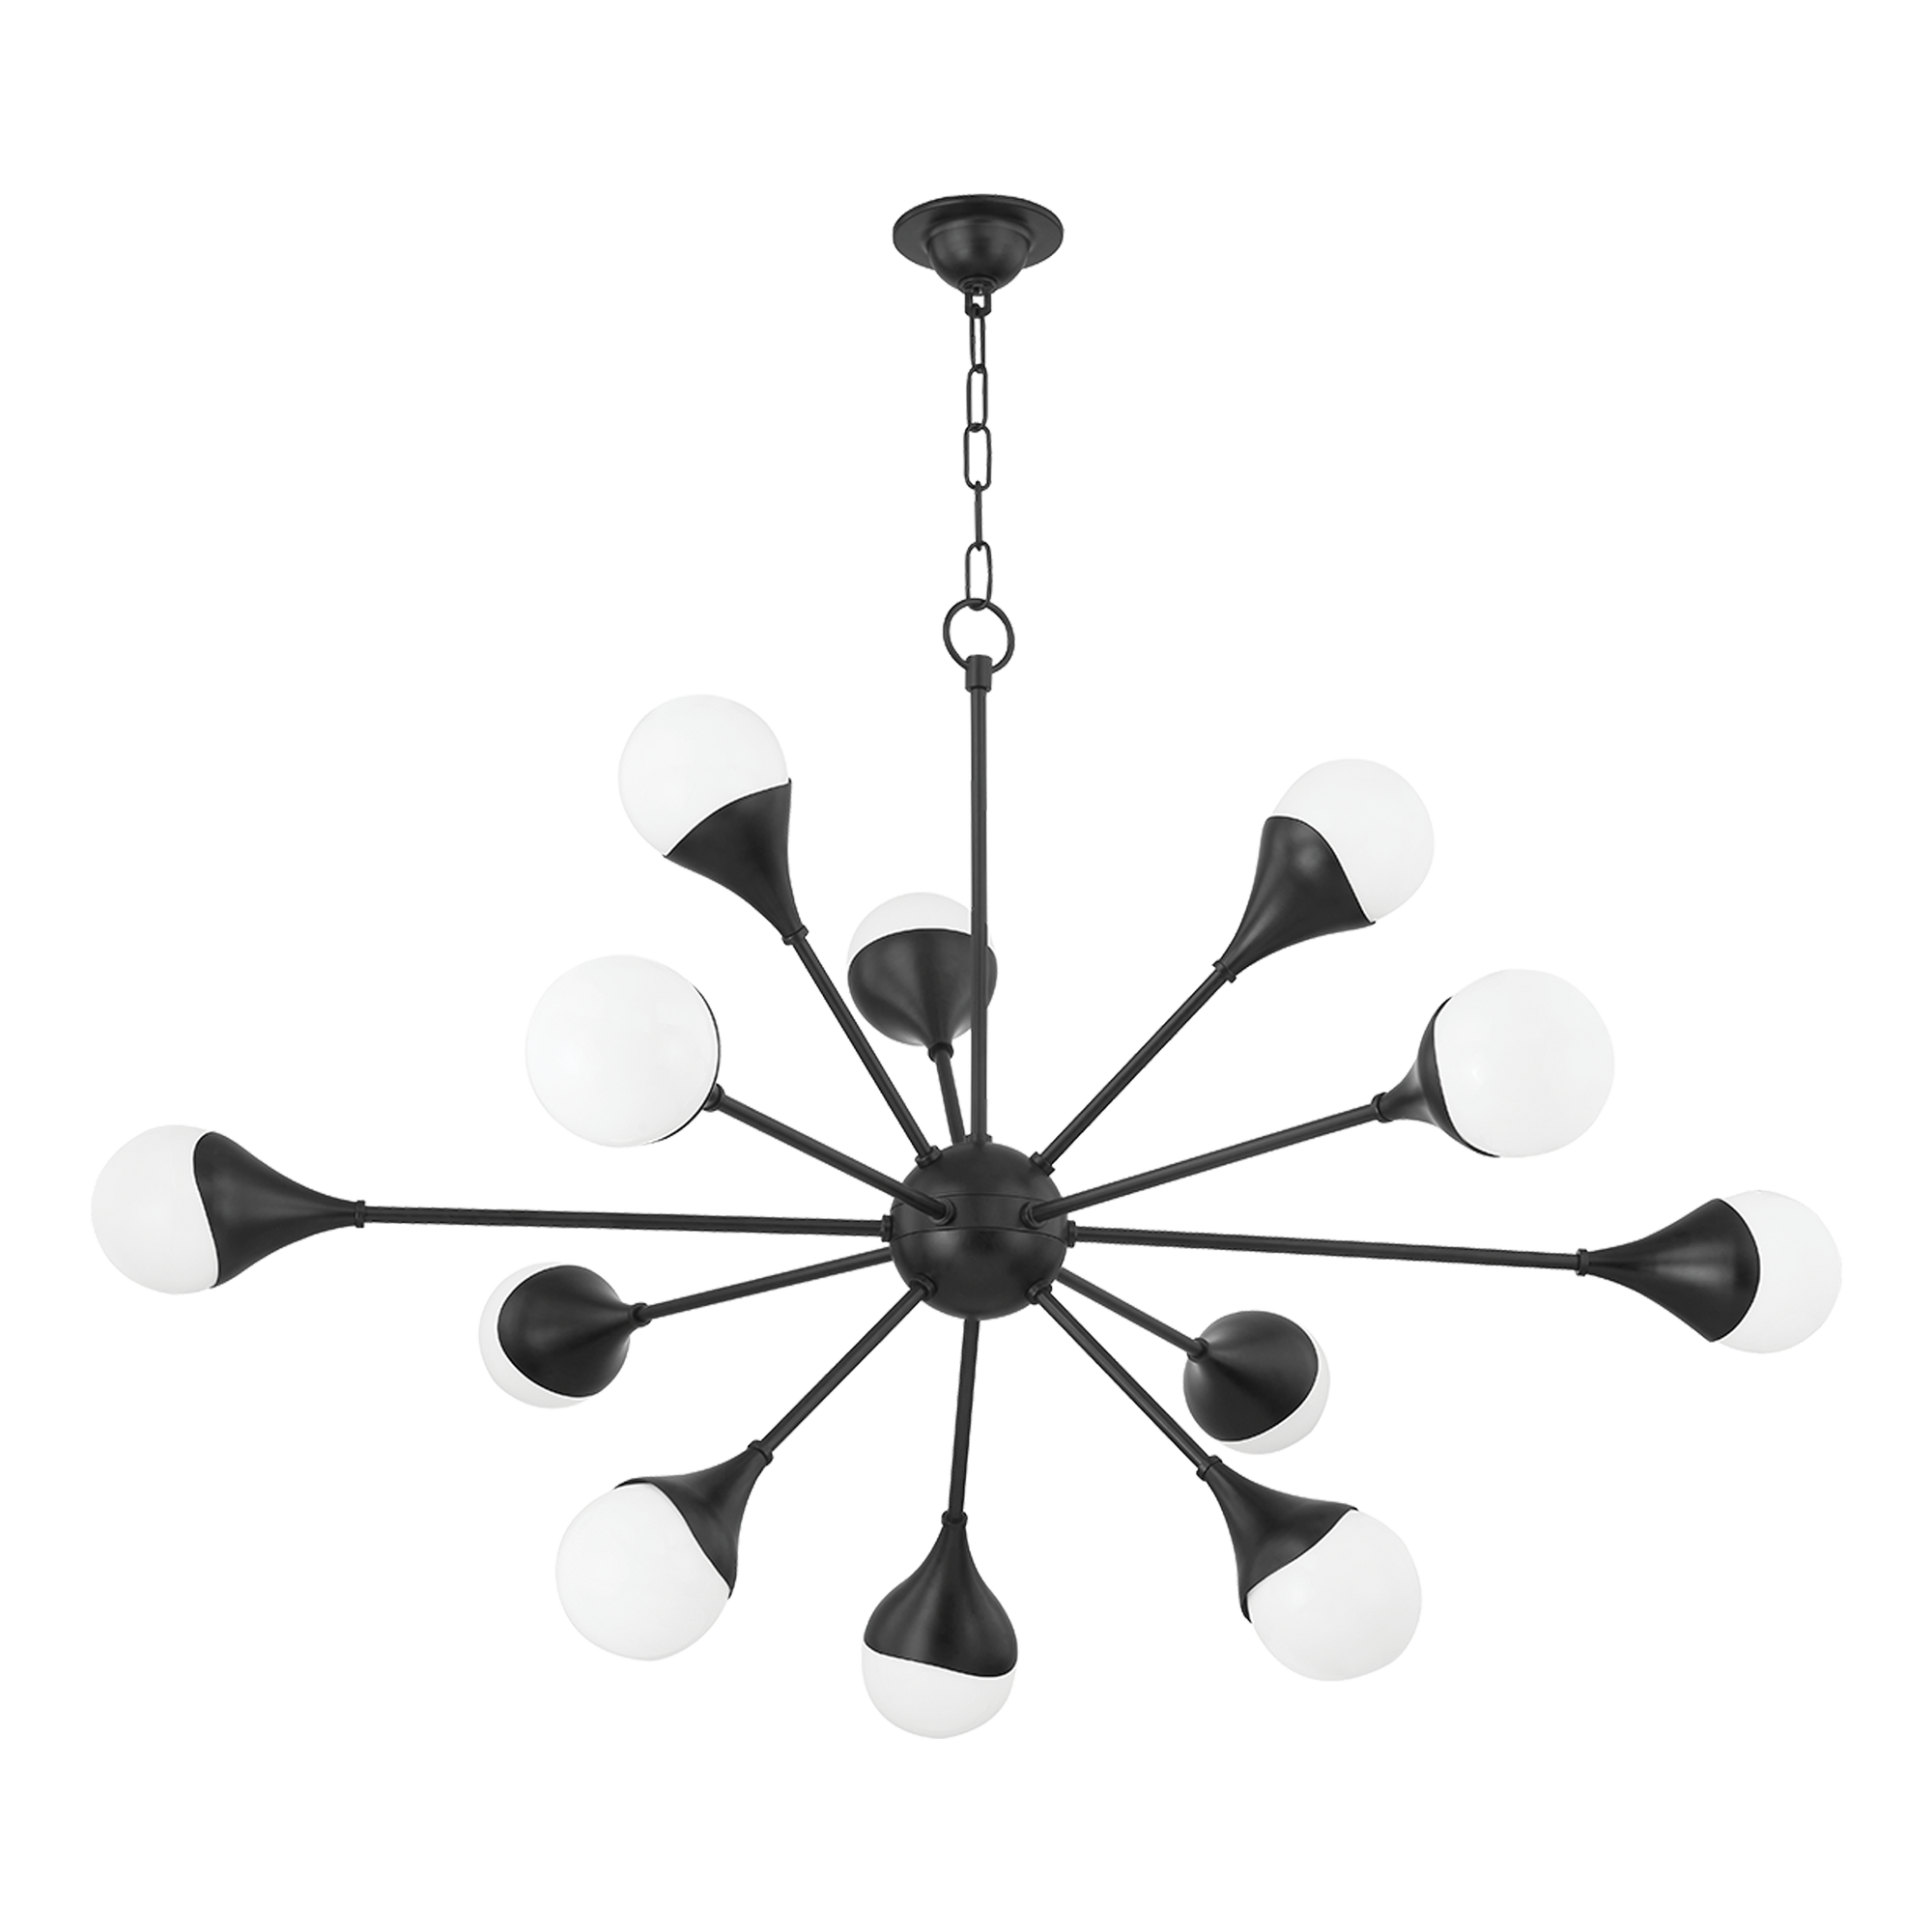 An opal-glass shade effortlessly drops from a smooth, wave-like holder in this fixture that oozes style.